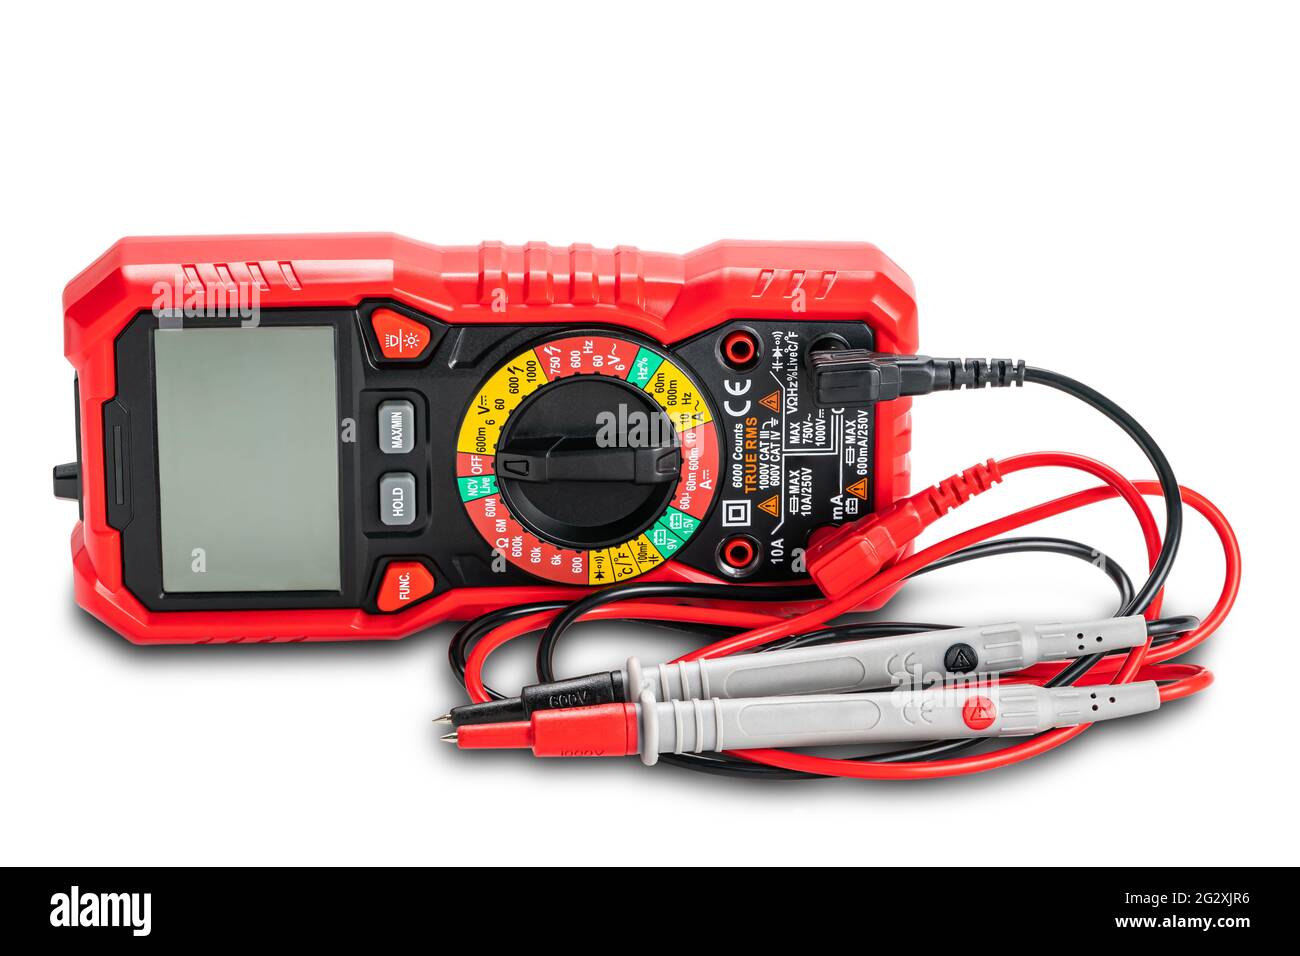 Side view of red portable digital multimeters or multitester with test leads and probes on white background contain clipping path. Stock Photo